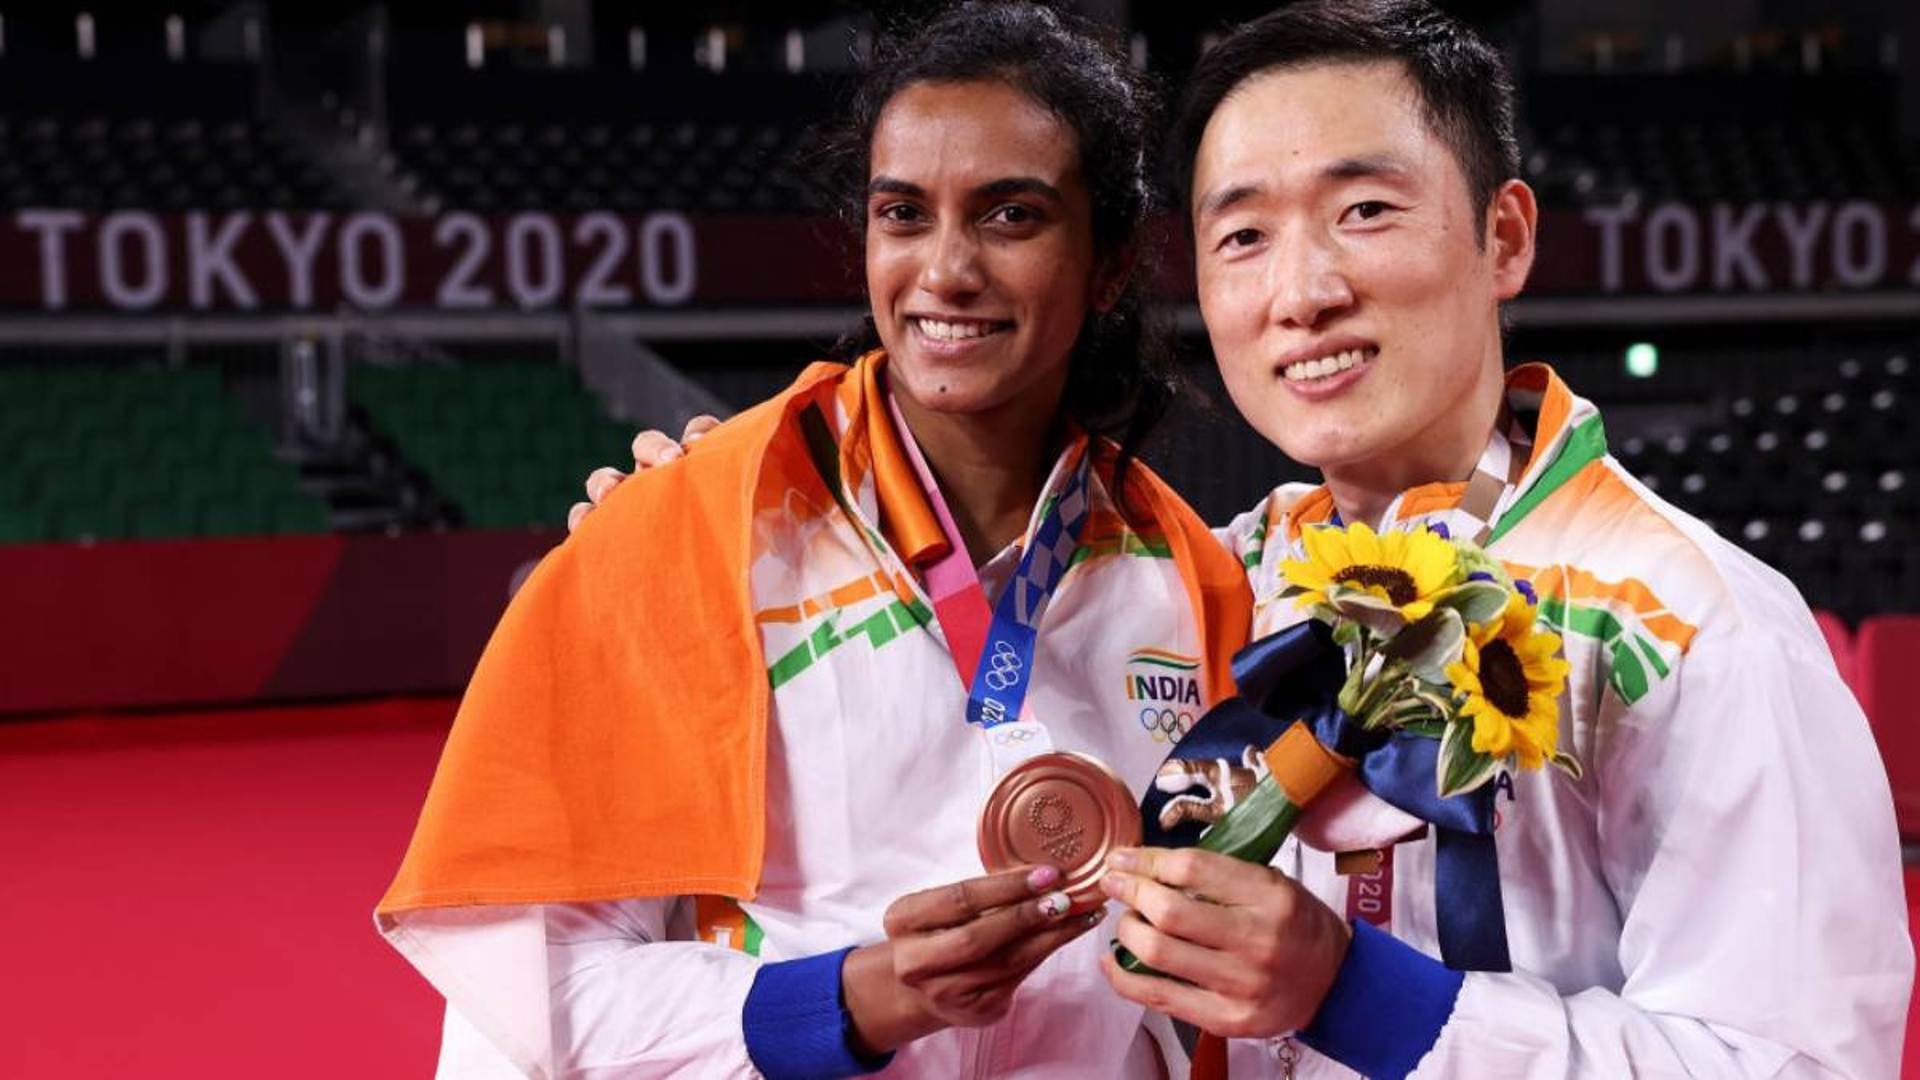 PV Sindhu and her former coach Park Tae Sang after Sindhu clinched the bronze medal at the Tokyo 2020 Olympics (Image Credits - Twitter)